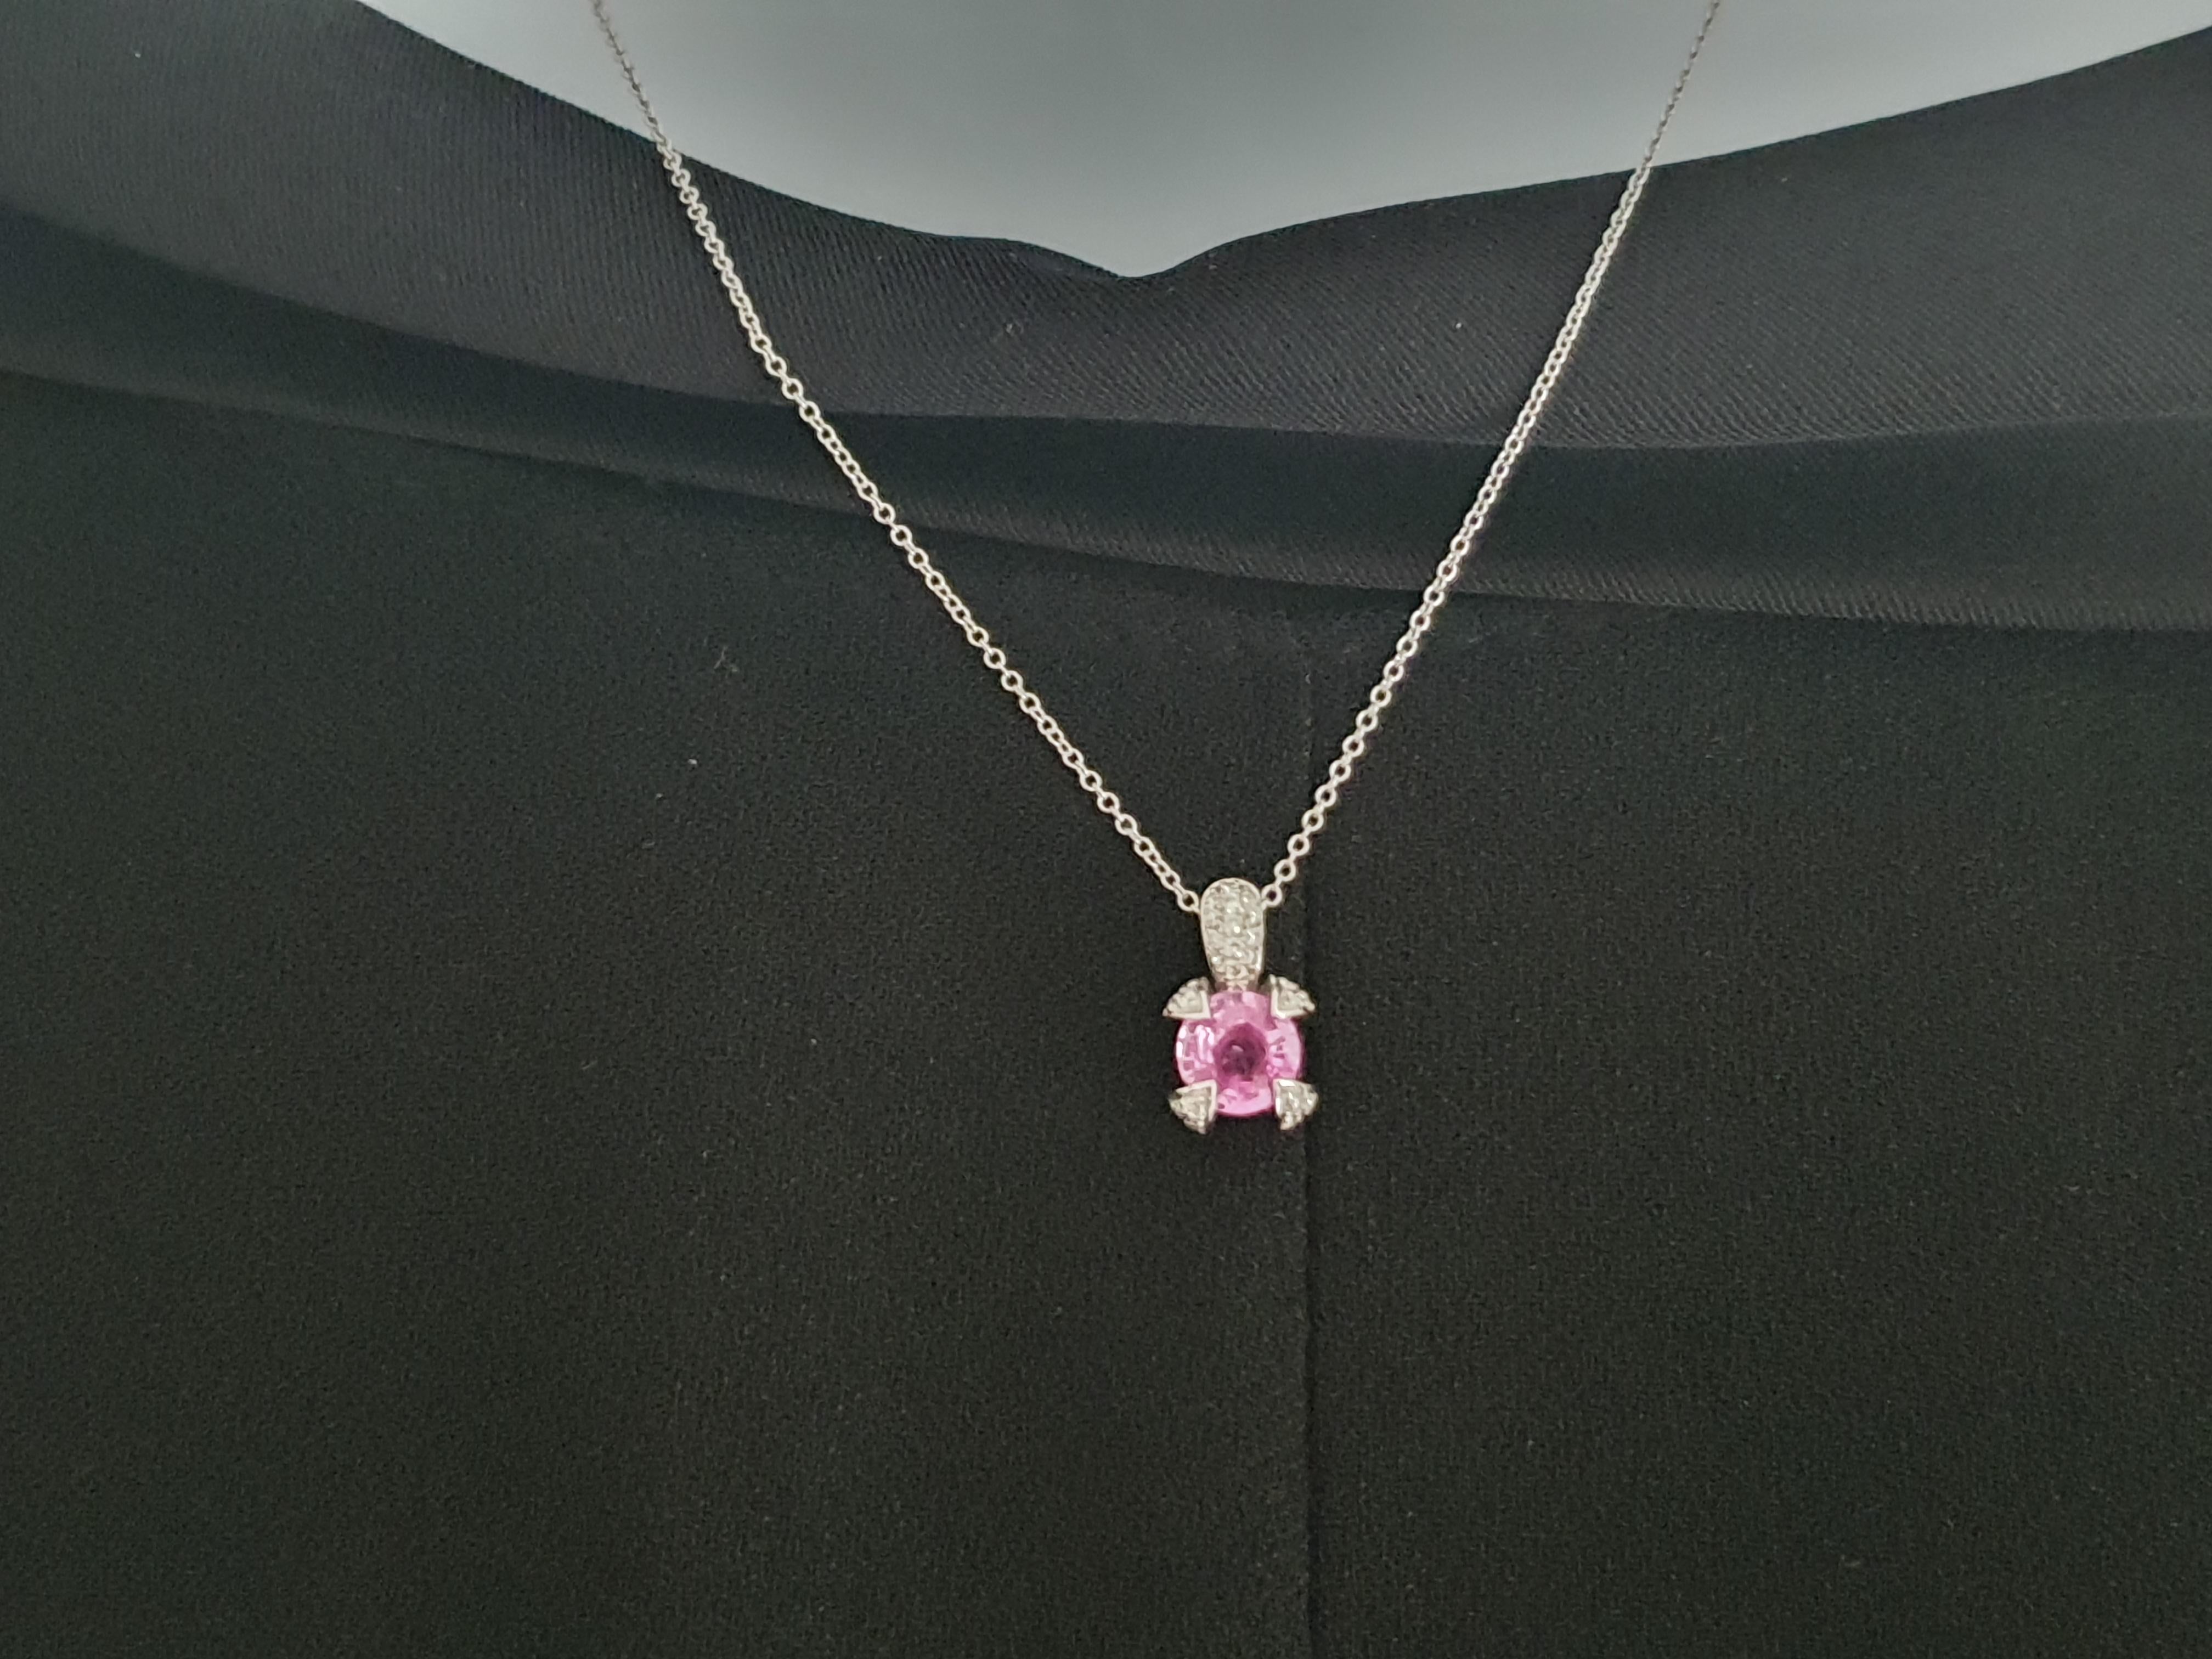 Garel - 0.86ct Pink Sapphire Pendant and 0.18ct Diamond Paving - 18K White Gold

4-leaf clover model pendant
1 x 0.86ct brilliant-cut pink sapphire, 4-prong setting
Diameter of the Pink Sapphire: 5 mm
Bail paved with Diamonds for a total weight of